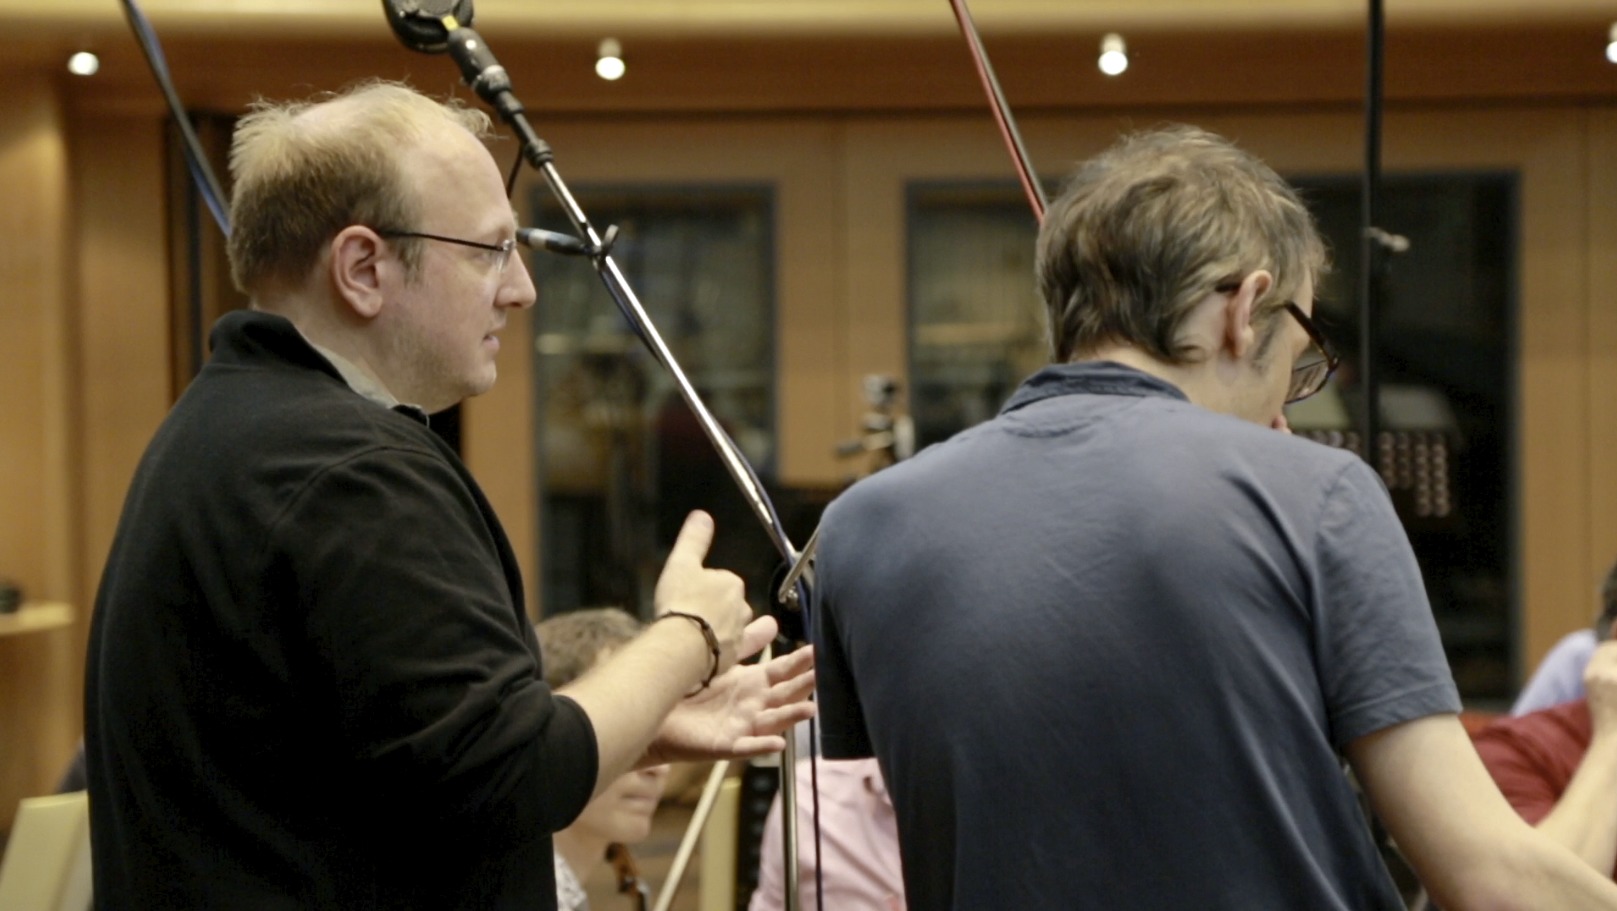 Composer Kerry Muzzey working with conductor Andrew Skeet and the Chamber Orchestra of London at AIR Studios, May 22, 2014